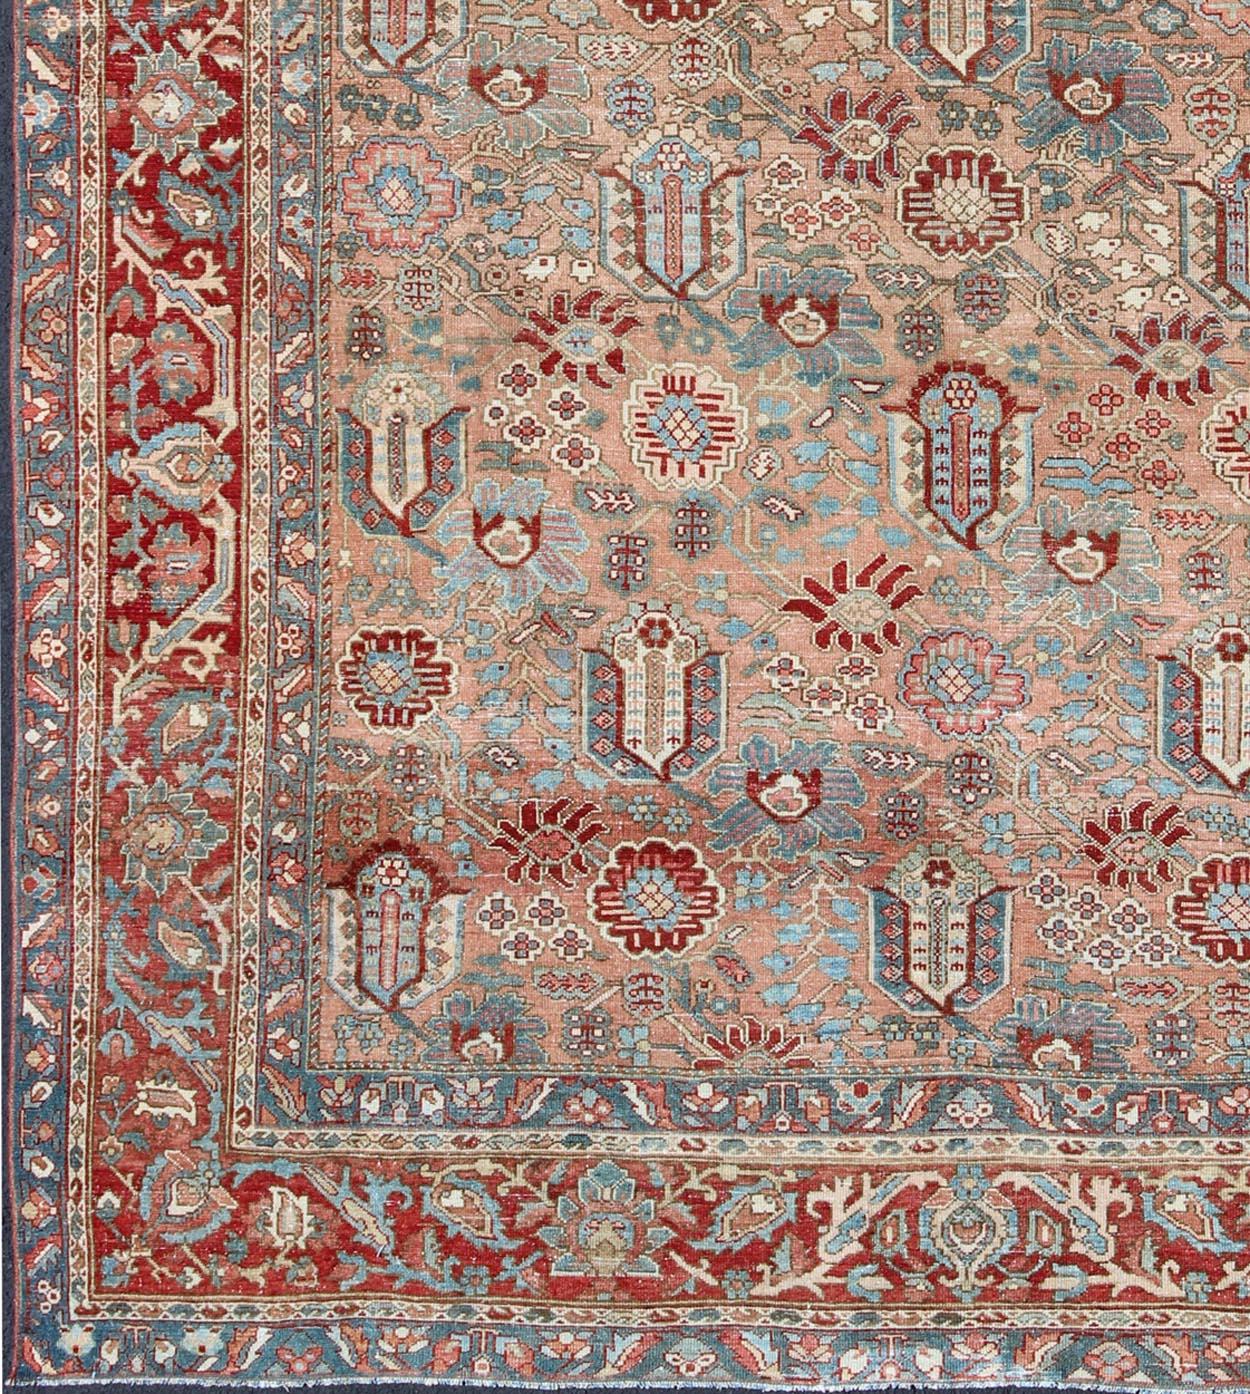 Geometric-floral antique Persian Bakhtiari rug with all-over design in Salmon, rug sus-1807-251, country of origin / type: Iran / Bakhtiari, circa 1910

Persian Bakhtiari rugs are in fact tribal pieces that rely upon a repertoire of abstract